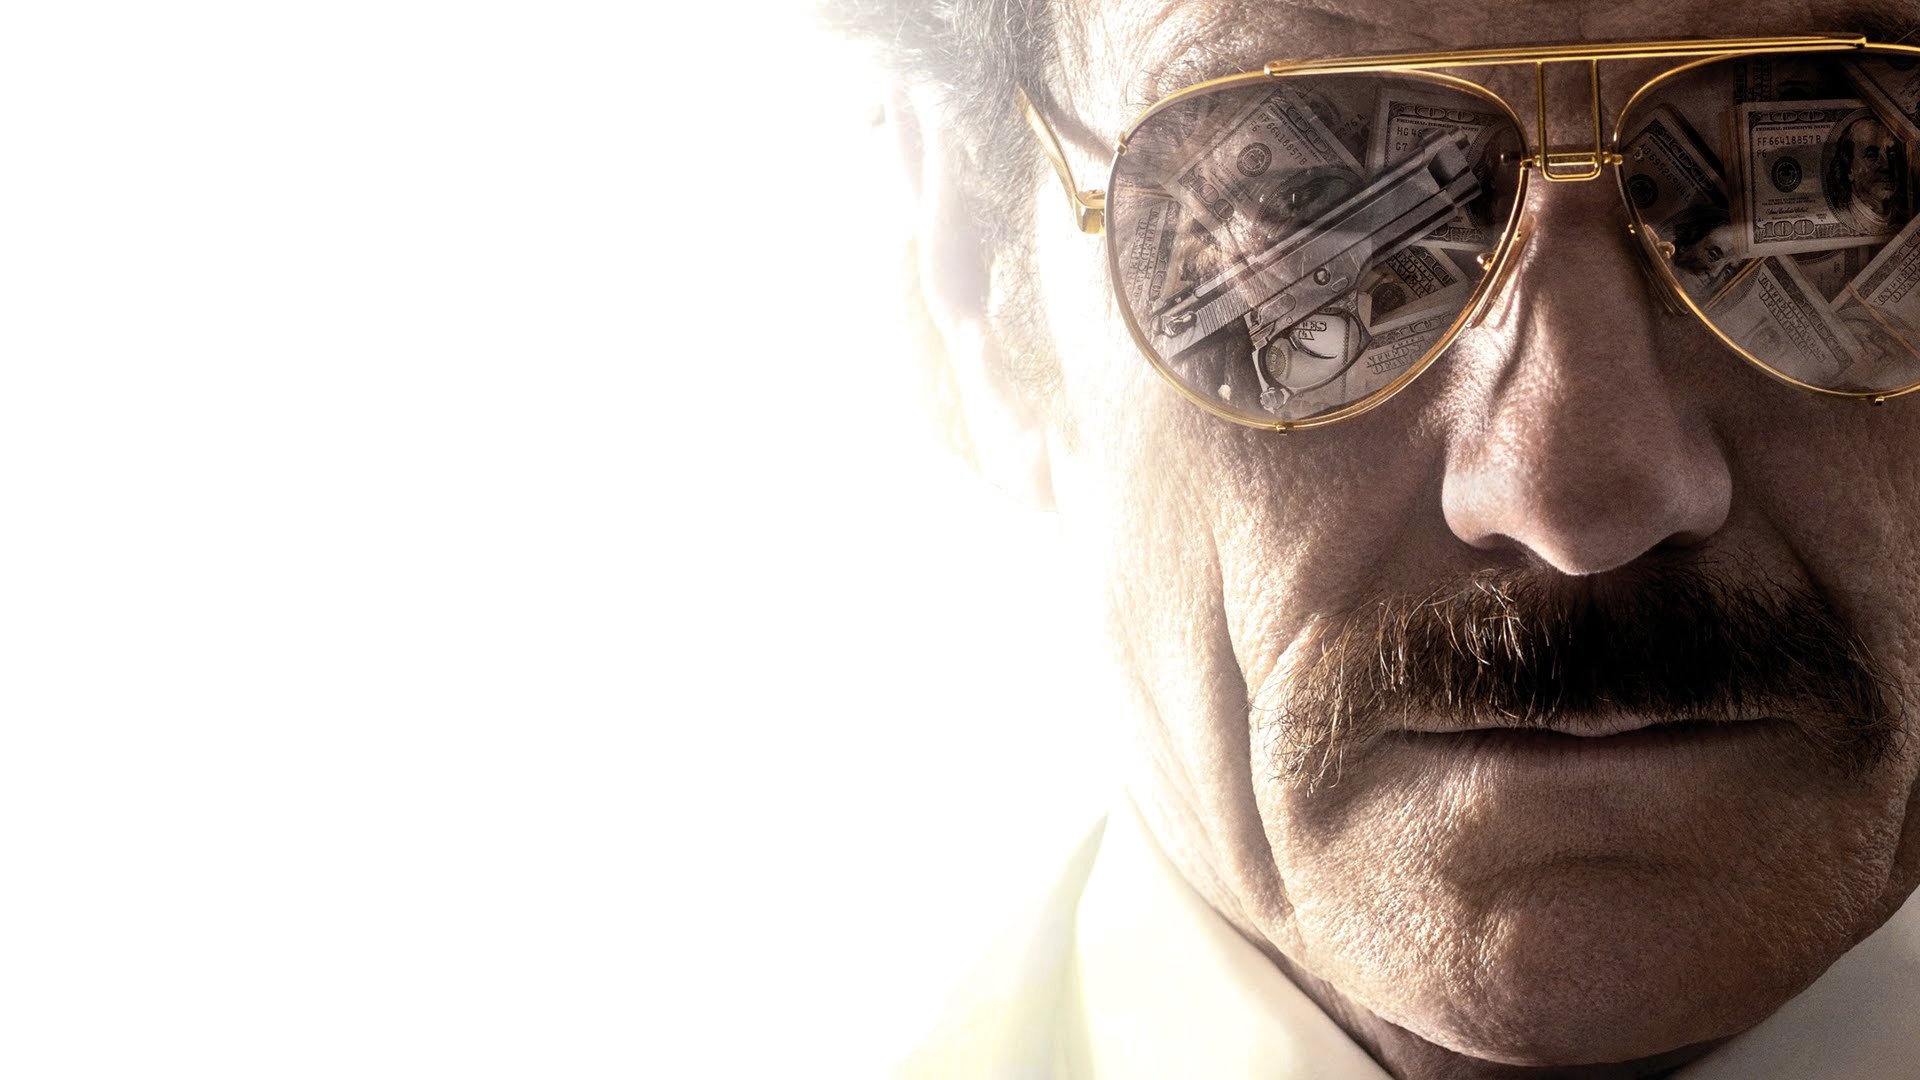 The Infiltrator, HD wallpapers, Hintergrnde, The movie, 1920x1080 Full HD Desktop